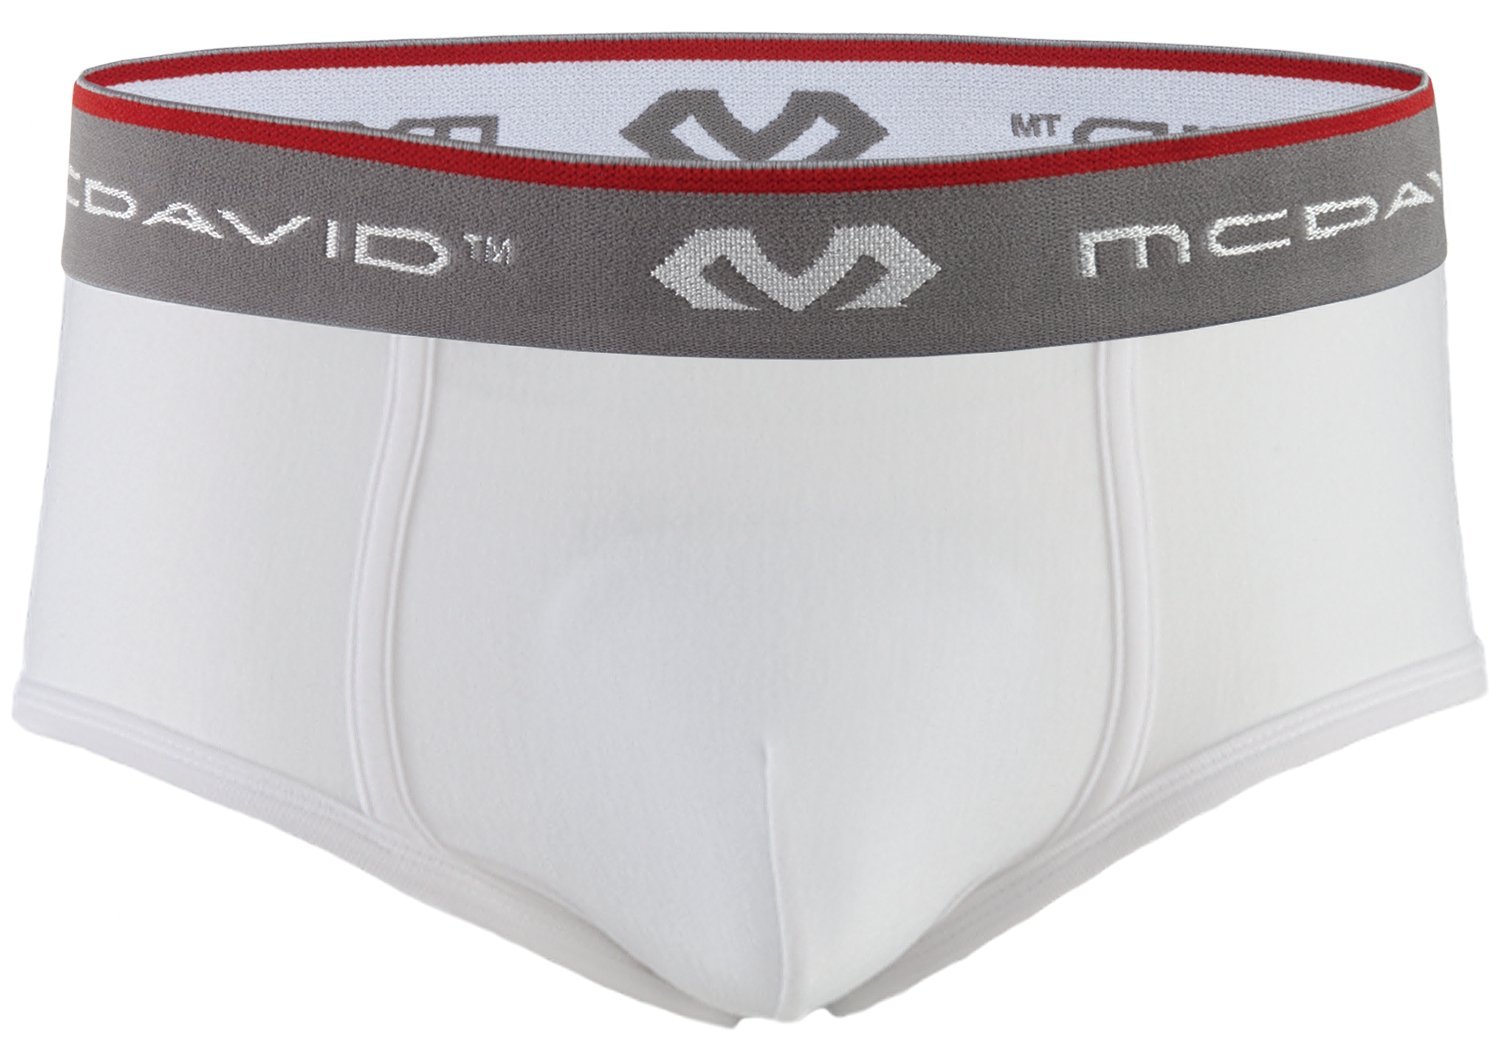  McDavid Boys' Boxer Brief Shorts with FlexCup Athletic  Protection, Moisture Wicking & Cooling, White, PeeWee Regular : Sports &  Outdoors